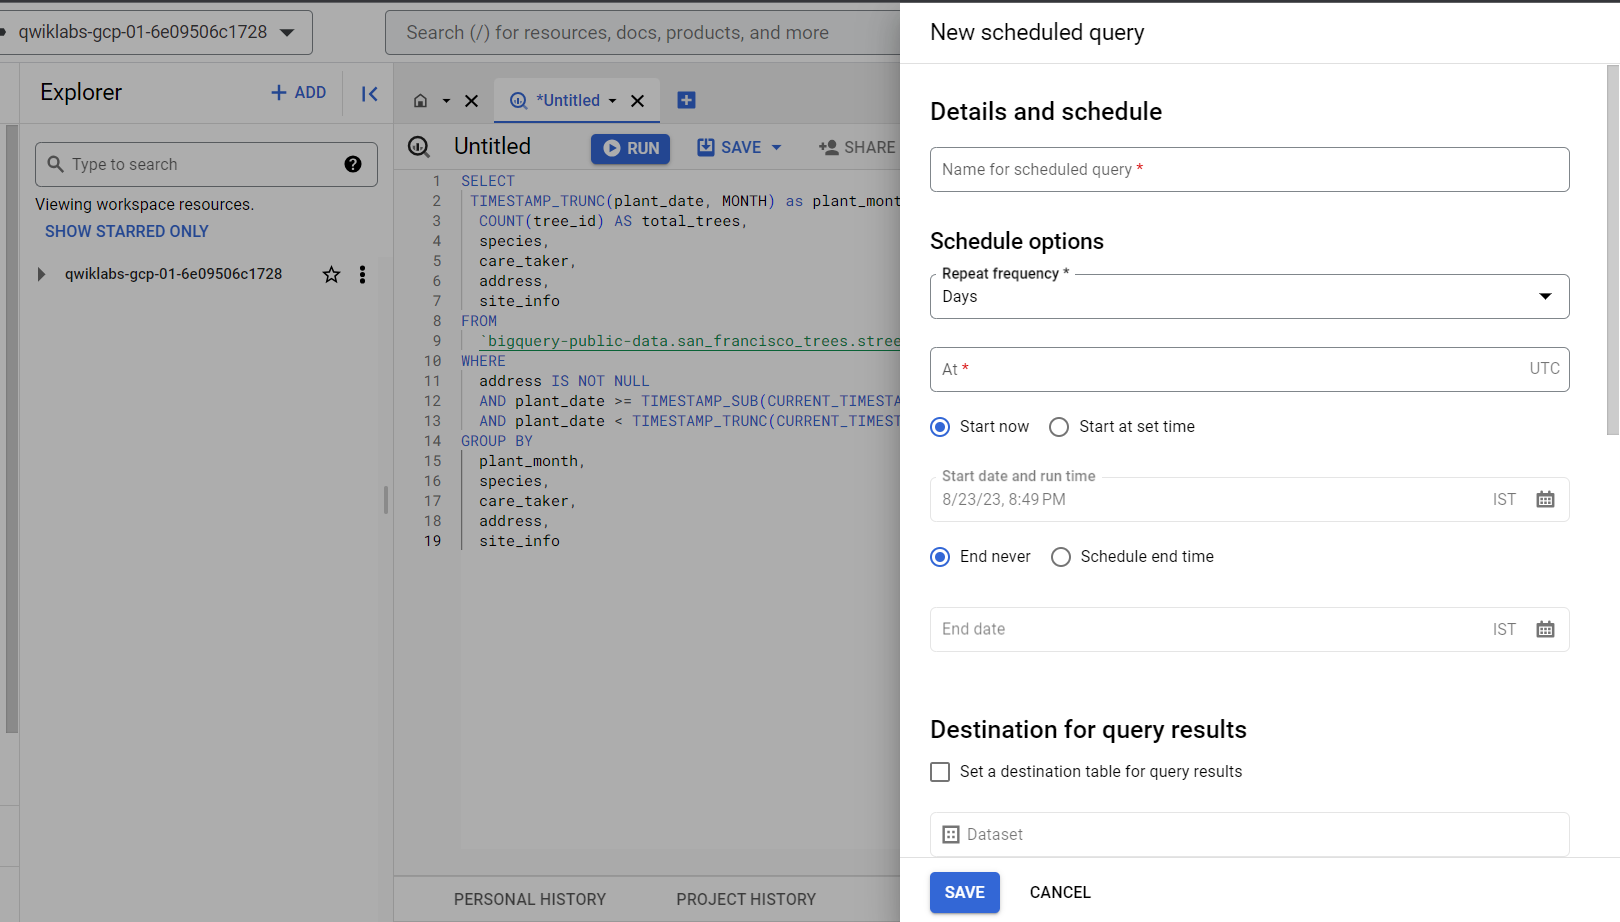 The Create new scheduled query option highlighted in the expanded Schedule menu